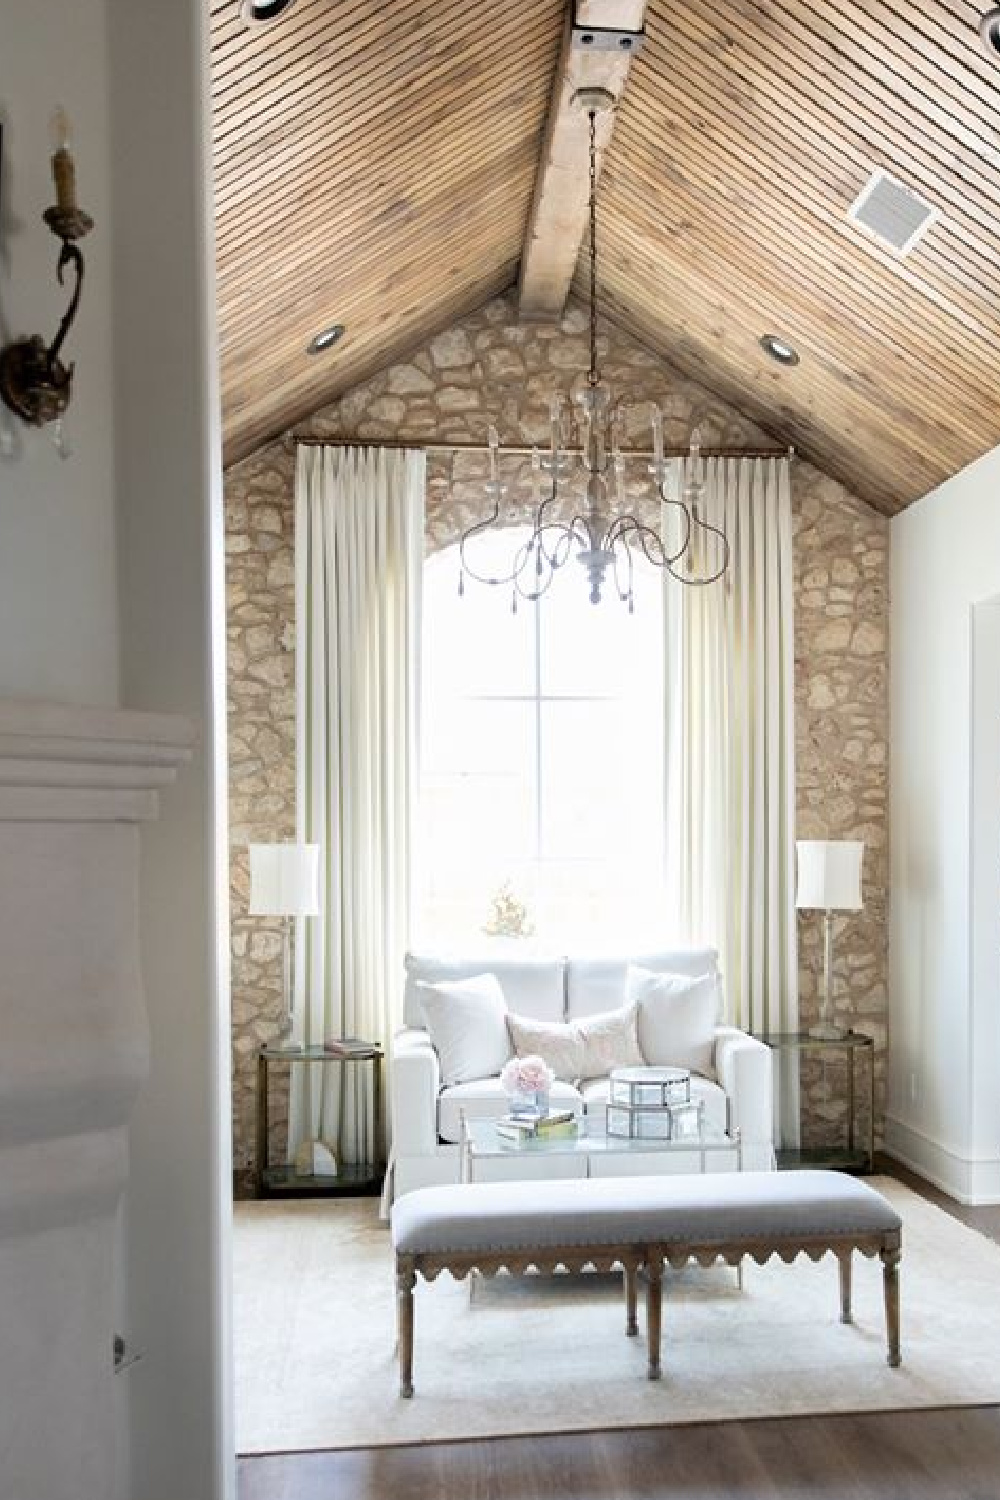 Stone statement wall in a French country bedroom sitting area - Brit Jones.